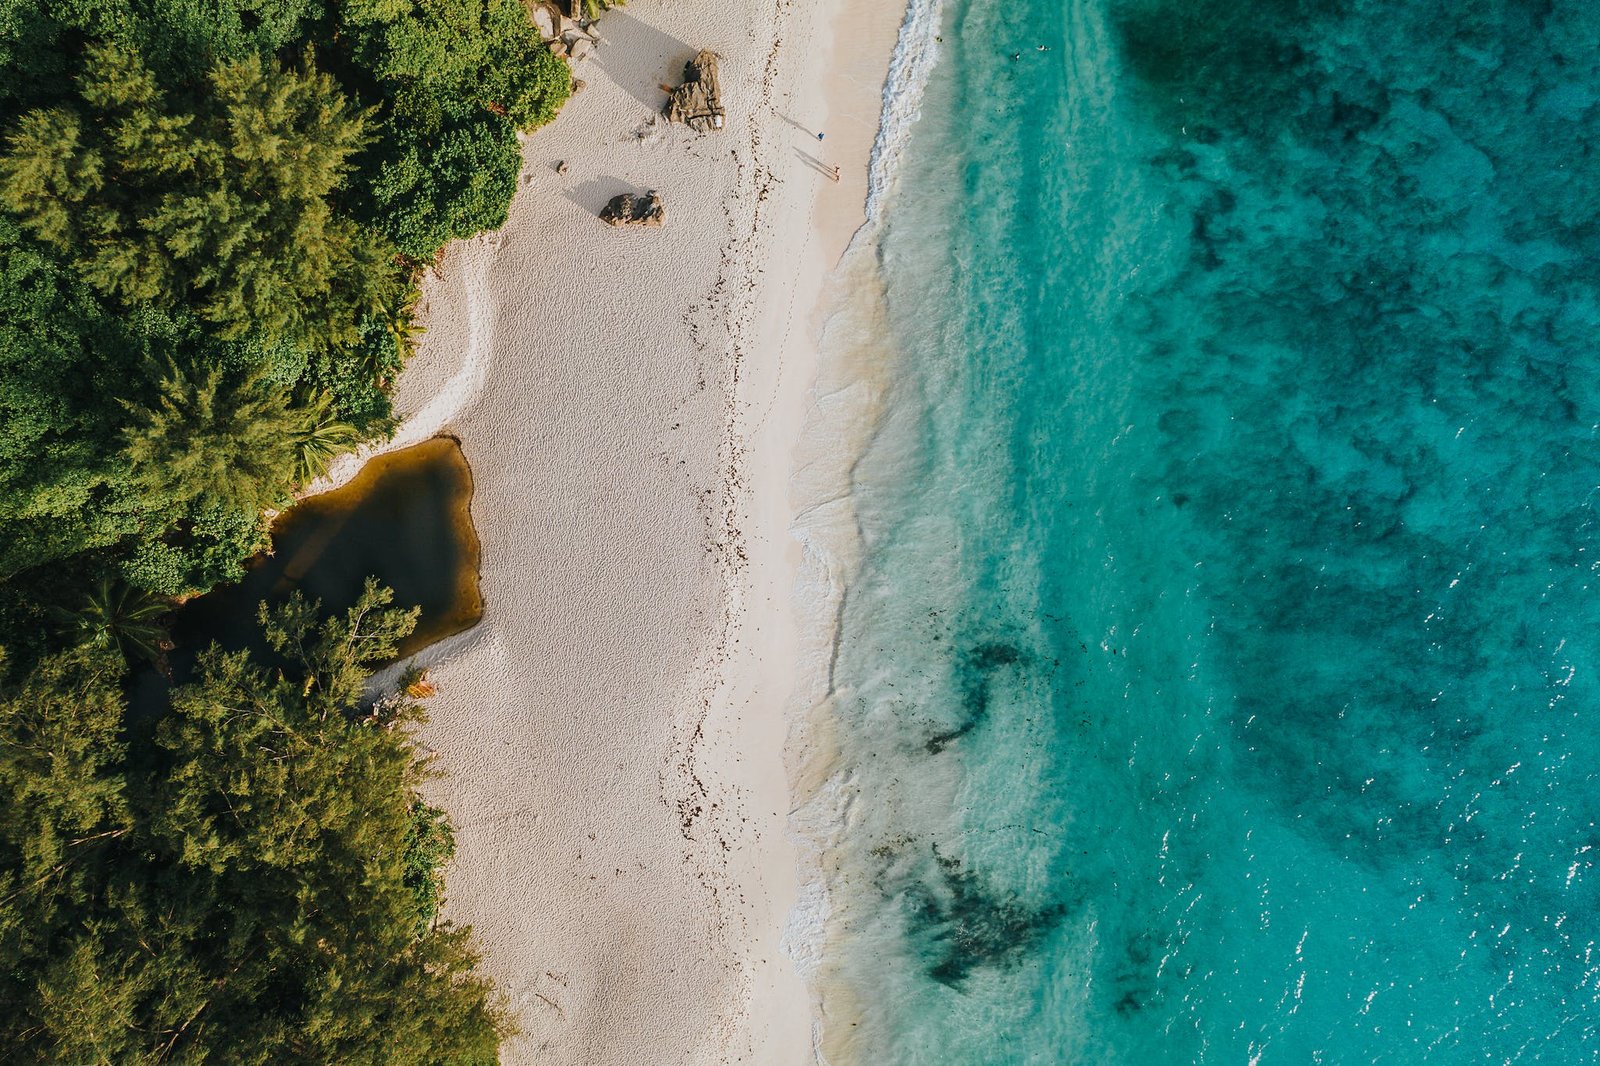 Drone Footage of a Beach that could be Zanzibar or Seychelles.